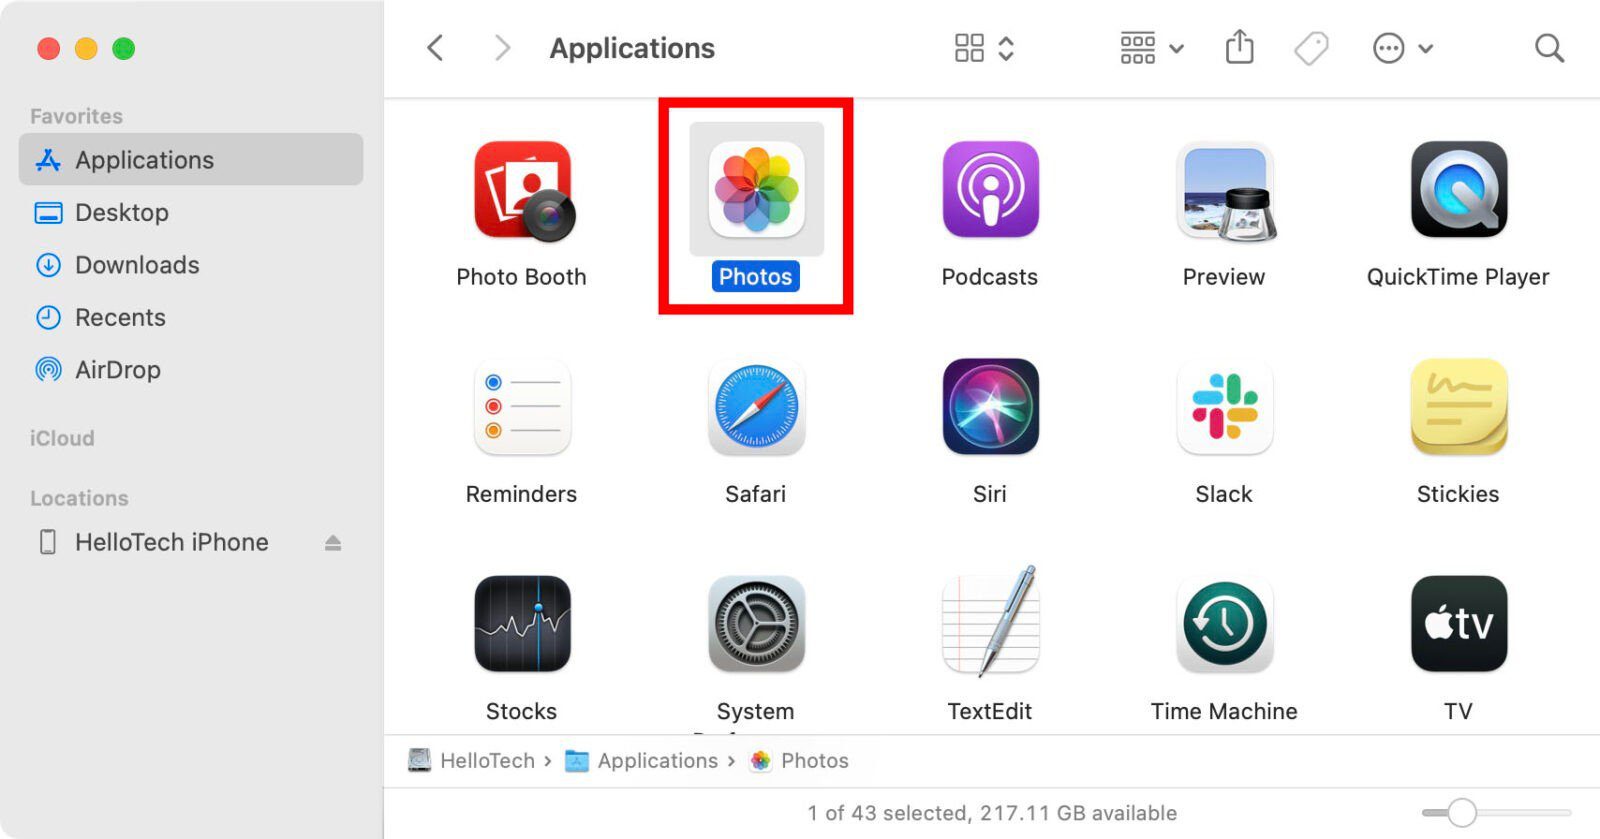 How to Import Photos From Your iPhone to the Photos App